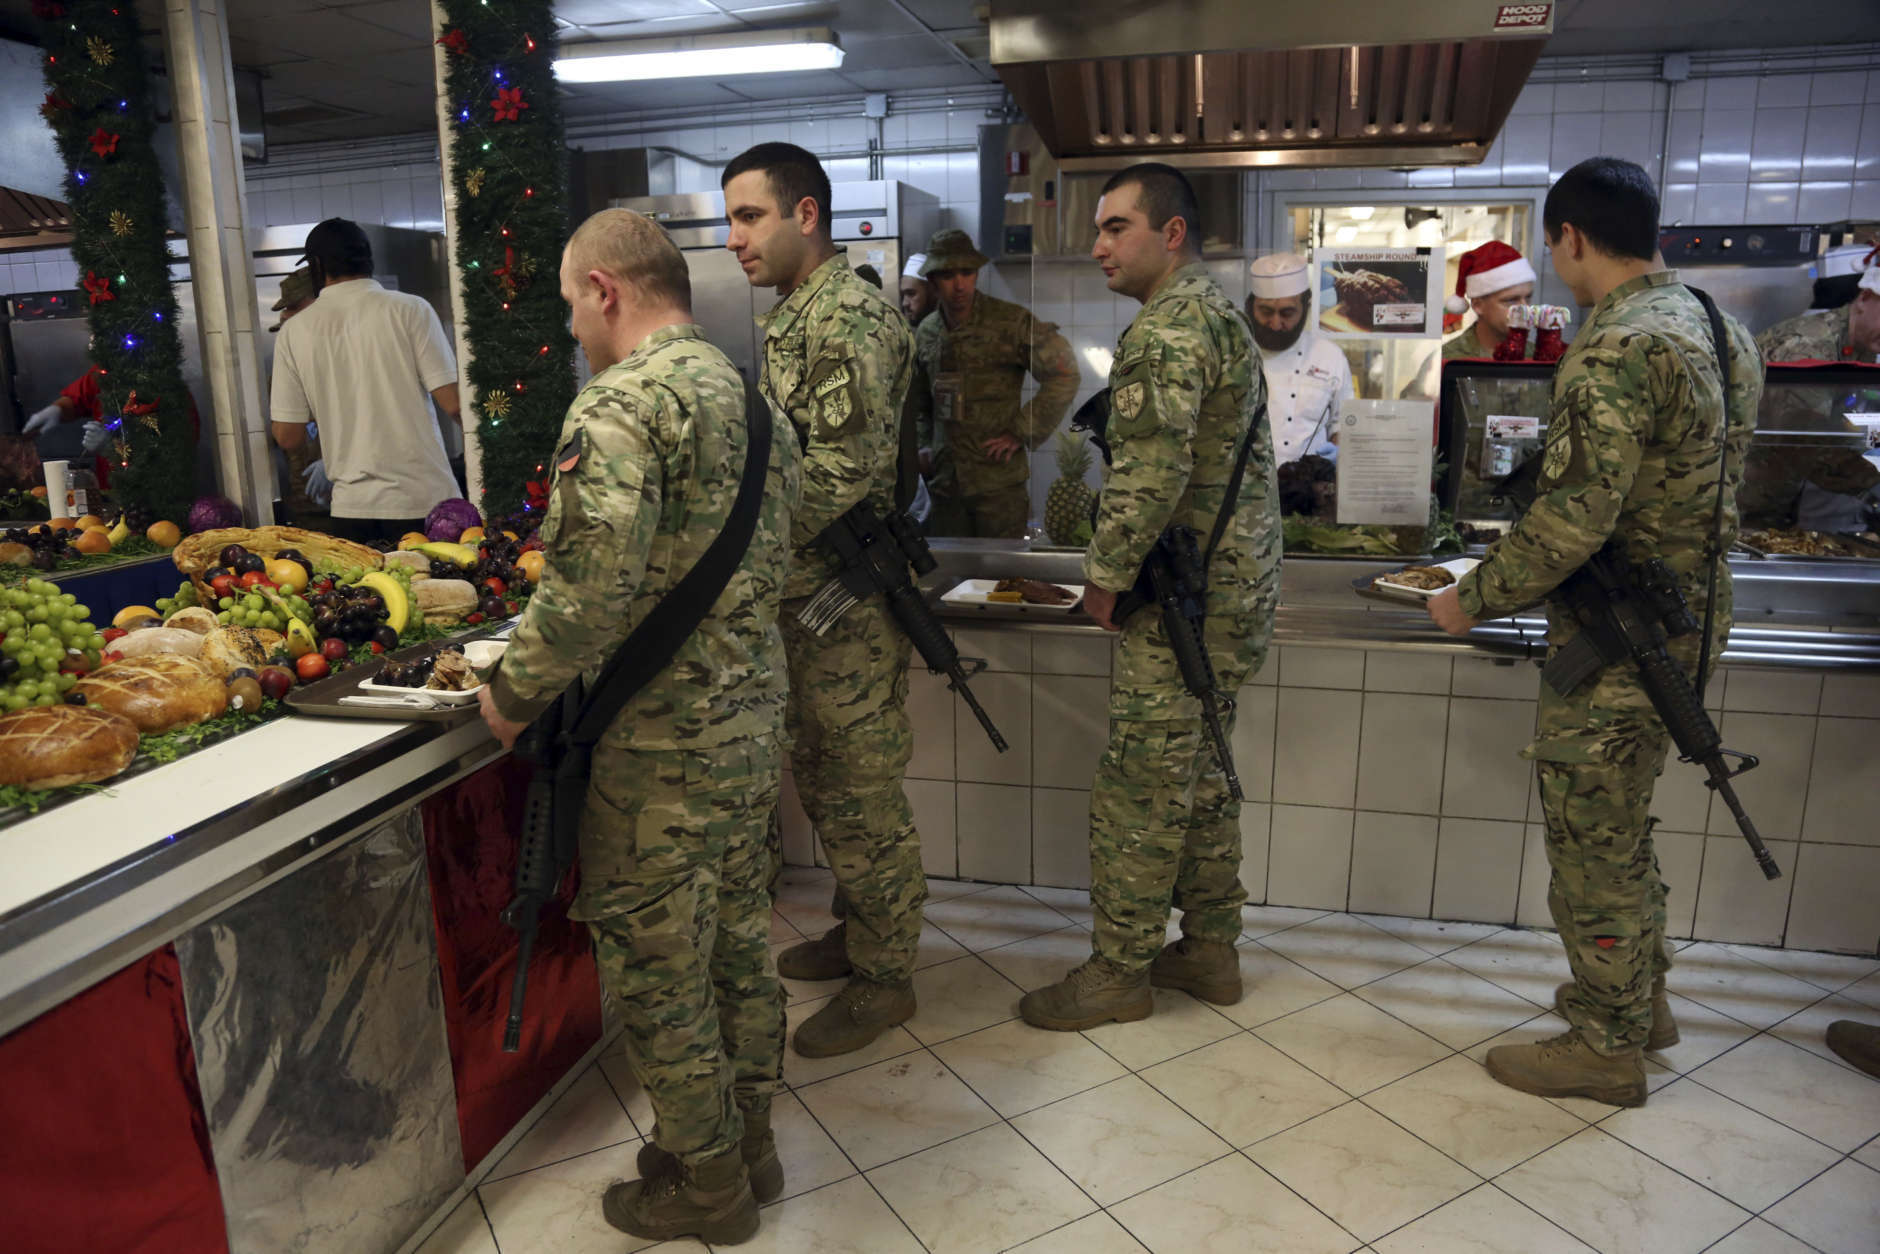 Members of the U.S. military take diner during a ceremony on Christmas Day at the Resolute Support Headquarters in Kabul, Afghanistan, Monday, Dec. 25, 2017. (AP Photo/Rahmat Gul)